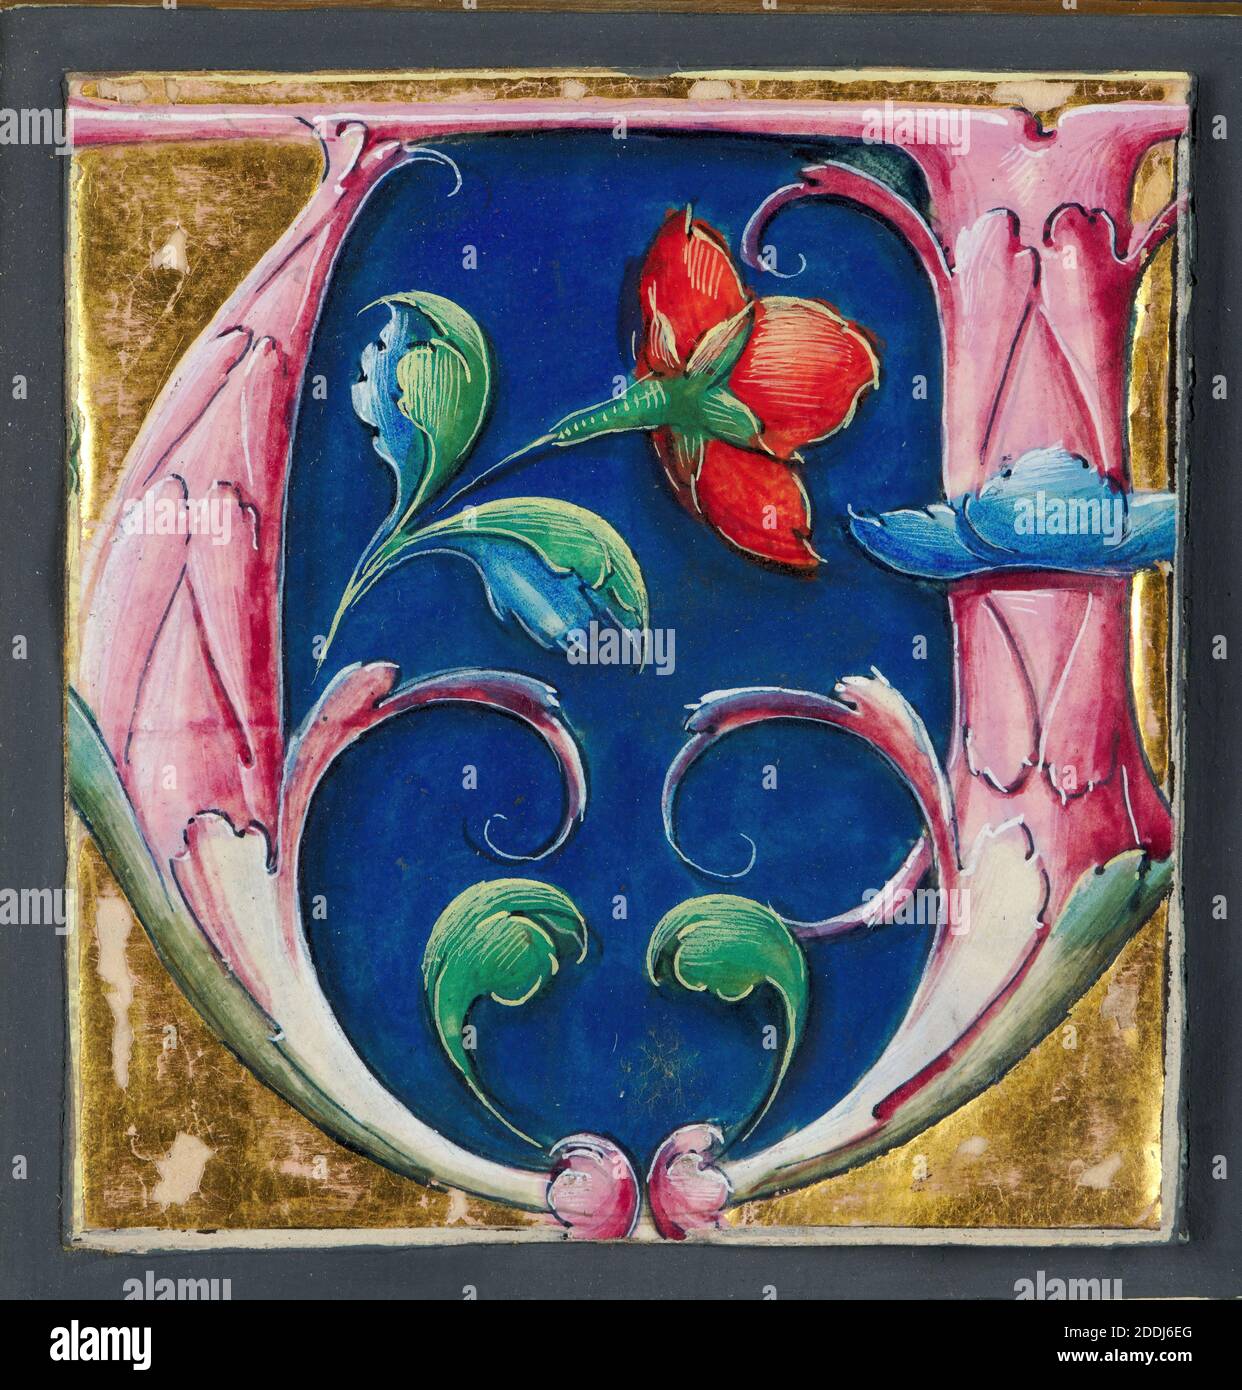 Decorated initial letter 'U', 1530 Unknown Artist, North Italian School, Precious metal, Gold, Tempera, Flower, Frame, Illuminated, Illustration, 16th Century, Leaf, Letter, Works on Paper Stock Photo